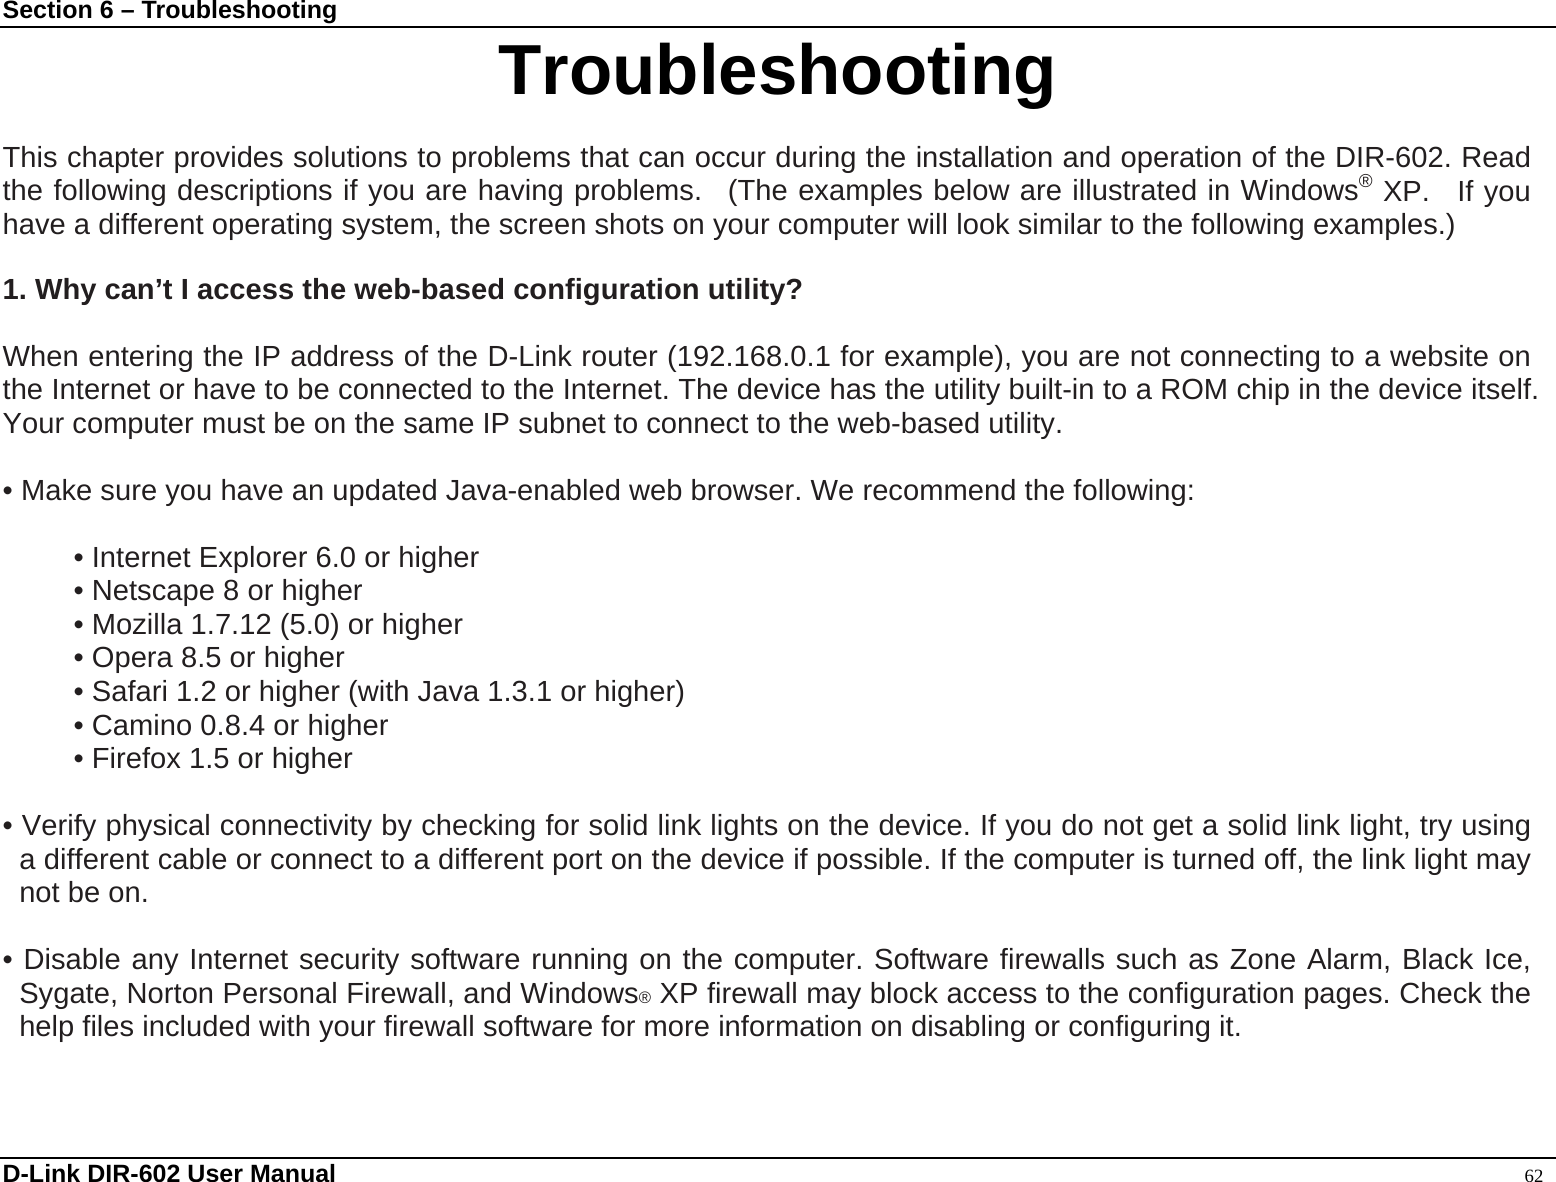 Section 6 – Troubleshooting  D-Link DIR-602 User Manual                                                                                               62 Troubleshooting  This chapter provides solutions to problems that can occur during the installation and operation of the DIR-602. Read the following descriptions if you are having problems.  (The examples below are illustrated in Windows® XP.  If you have a different operating system, the screen shots on your computer will look similar to the following examples.)  1. Why can’t I access the web-based configuration utility?  When entering the IP address of the D-Link router (192.168.0.1 for example), you are not connecting to a website on the Internet or have to be connected to the Internet. The device has the utility built-in to a ROM chip in the device itself. Your computer must be on the same IP subnet to connect to the web-based utility.    • Make sure you have an updated Java-enabled web browser. We recommend the following:    • Internet Explorer 6.0 or higher   • Netscape 8 or higher   • Mozilla 1.7.12 (5.0) or higher   • Opera 8.5 or higher   • Safari 1.2 or higher (with Java 1.3.1 or higher)   • Camino 0.8.4 or higher   • Firefox 1.5 or higher    • Verify physical connectivity by checking for solid link lights on the device. If you do not get a solid link light, try using a different cable or connect to a different port on the device if possible. If the computer is turned off, the link light may not be on.  • Disable any Internet security software running on the computer. Software firewalls such as Zone Alarm, Black Ice, Sygate, Norton Personal Firewall, and Windows® XP firewall may block access to the configuration pages. Check the help files included with your firewall software for more information on disabling or configuring it.   